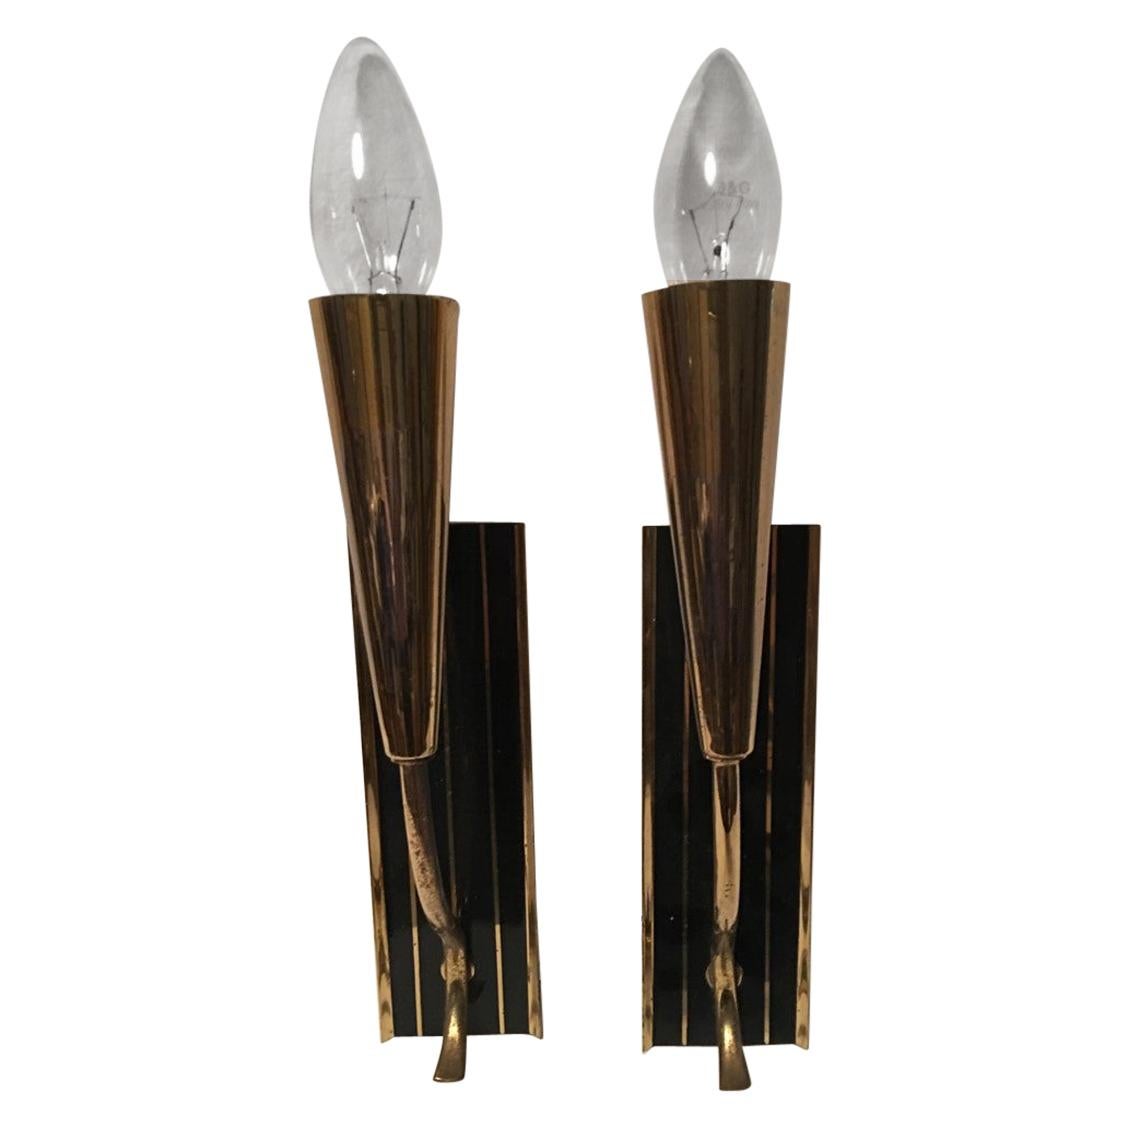 1950s Italian Brass Black Striped Sconces Very Art Deco Styling For Sale